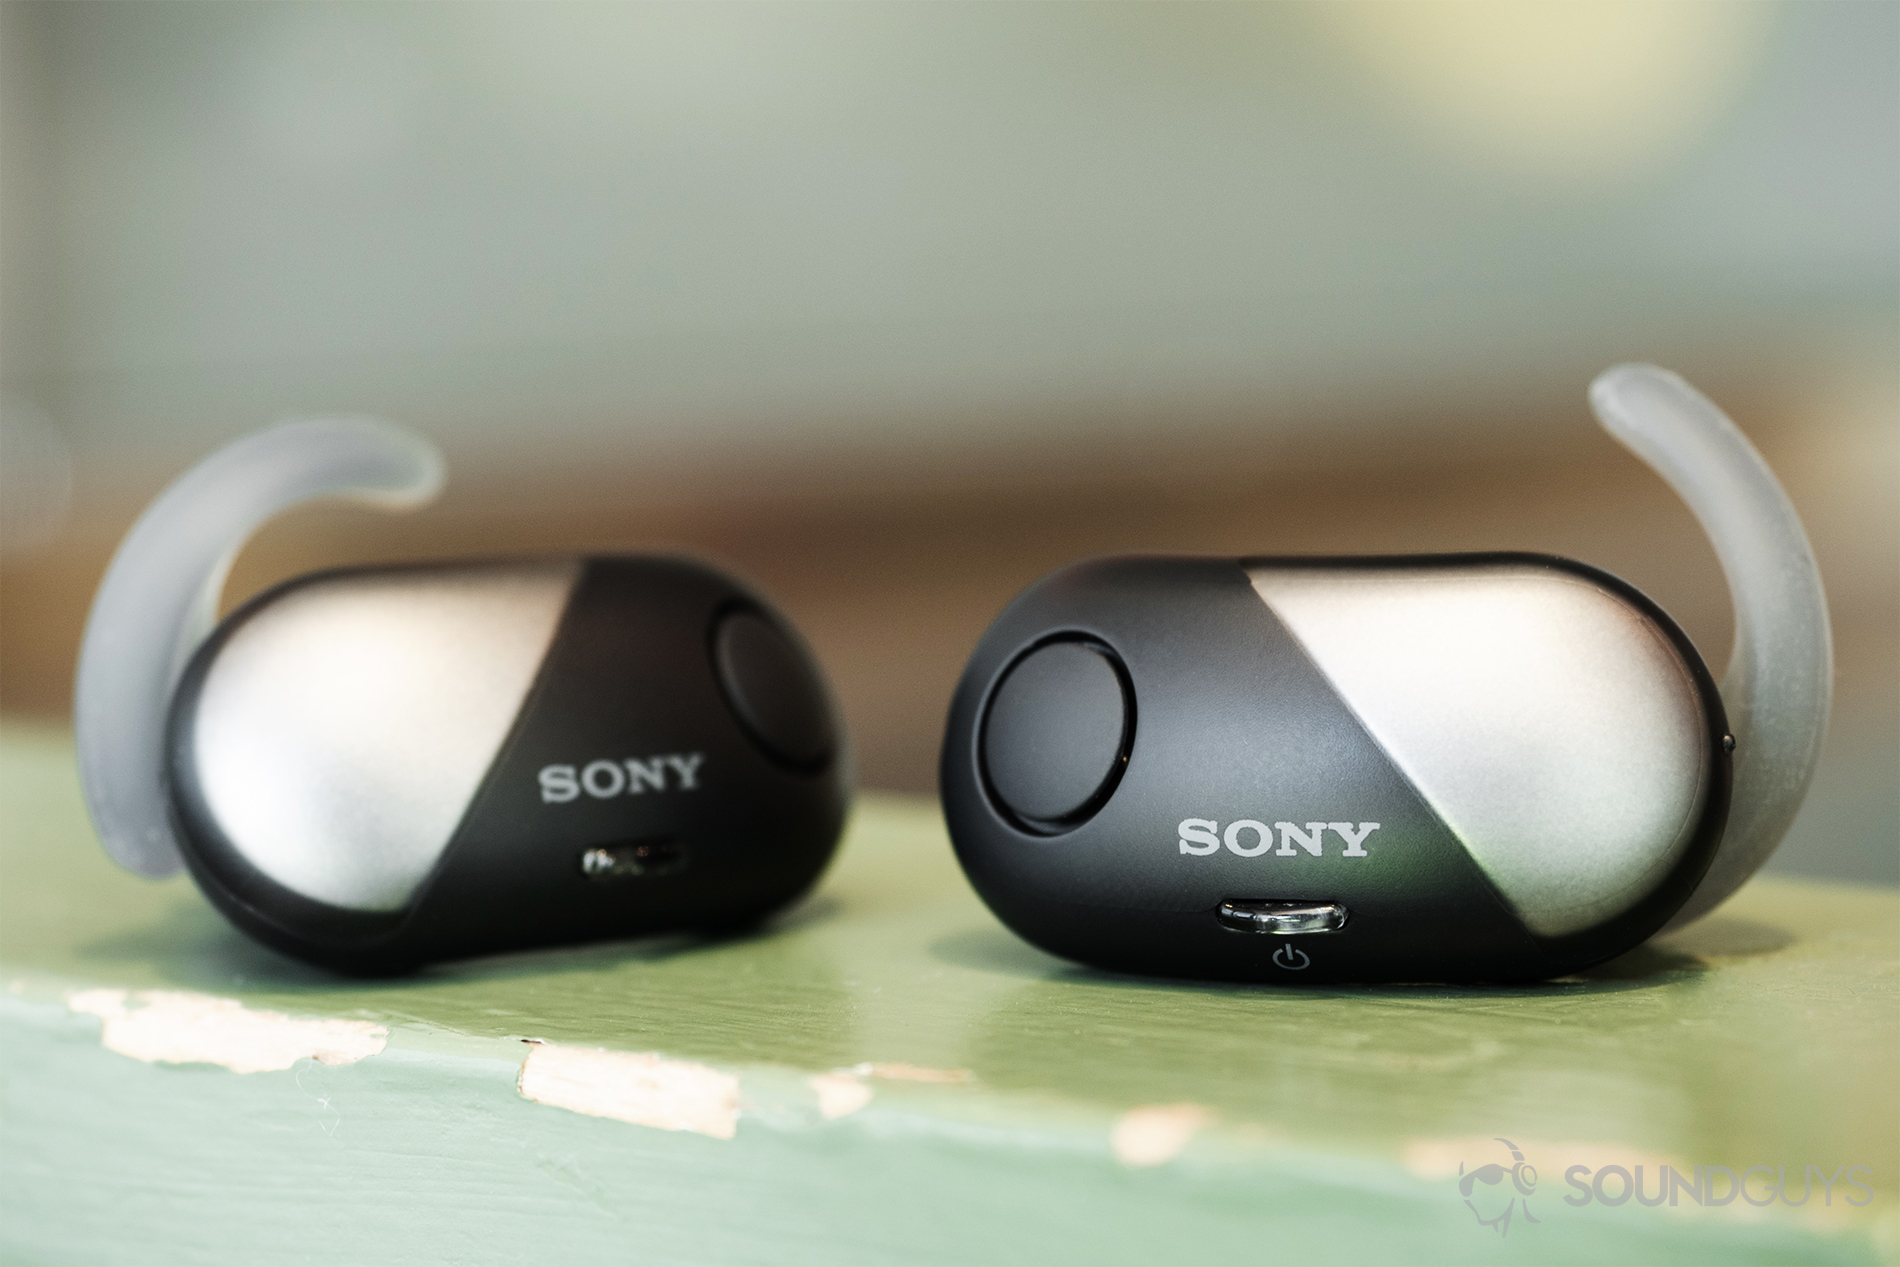 Sony WF-SP700N: The two earbuds front-facing on a green wooden railing.